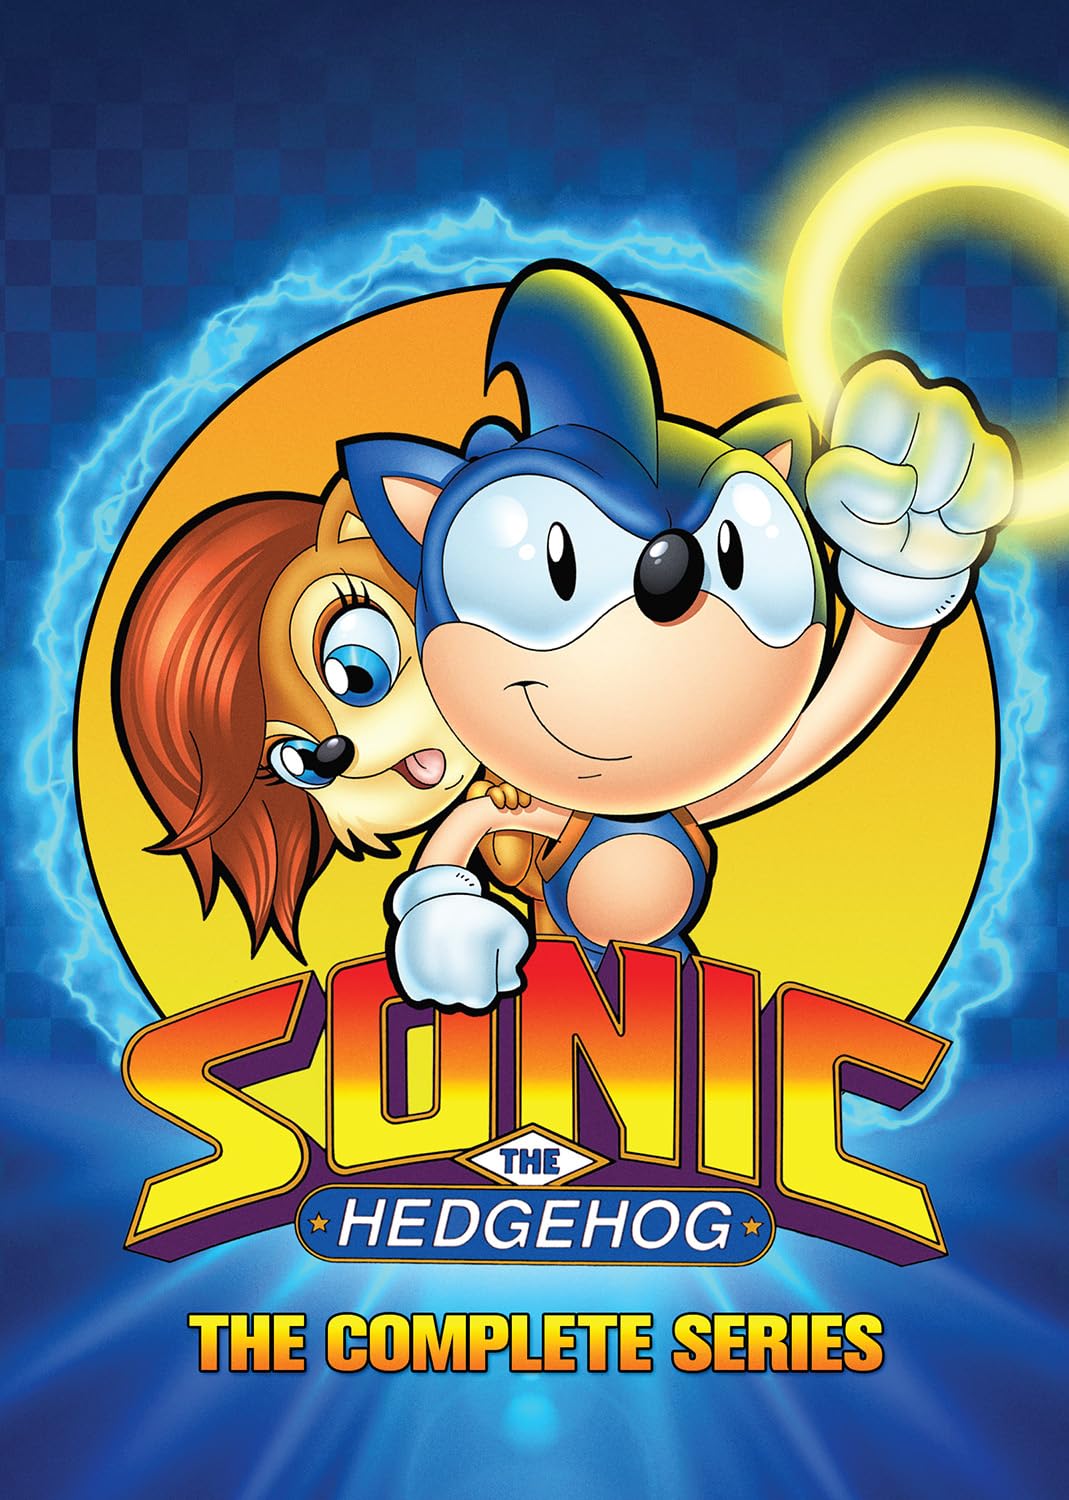 Sonic the Hedgehog 3 - Wikiwand